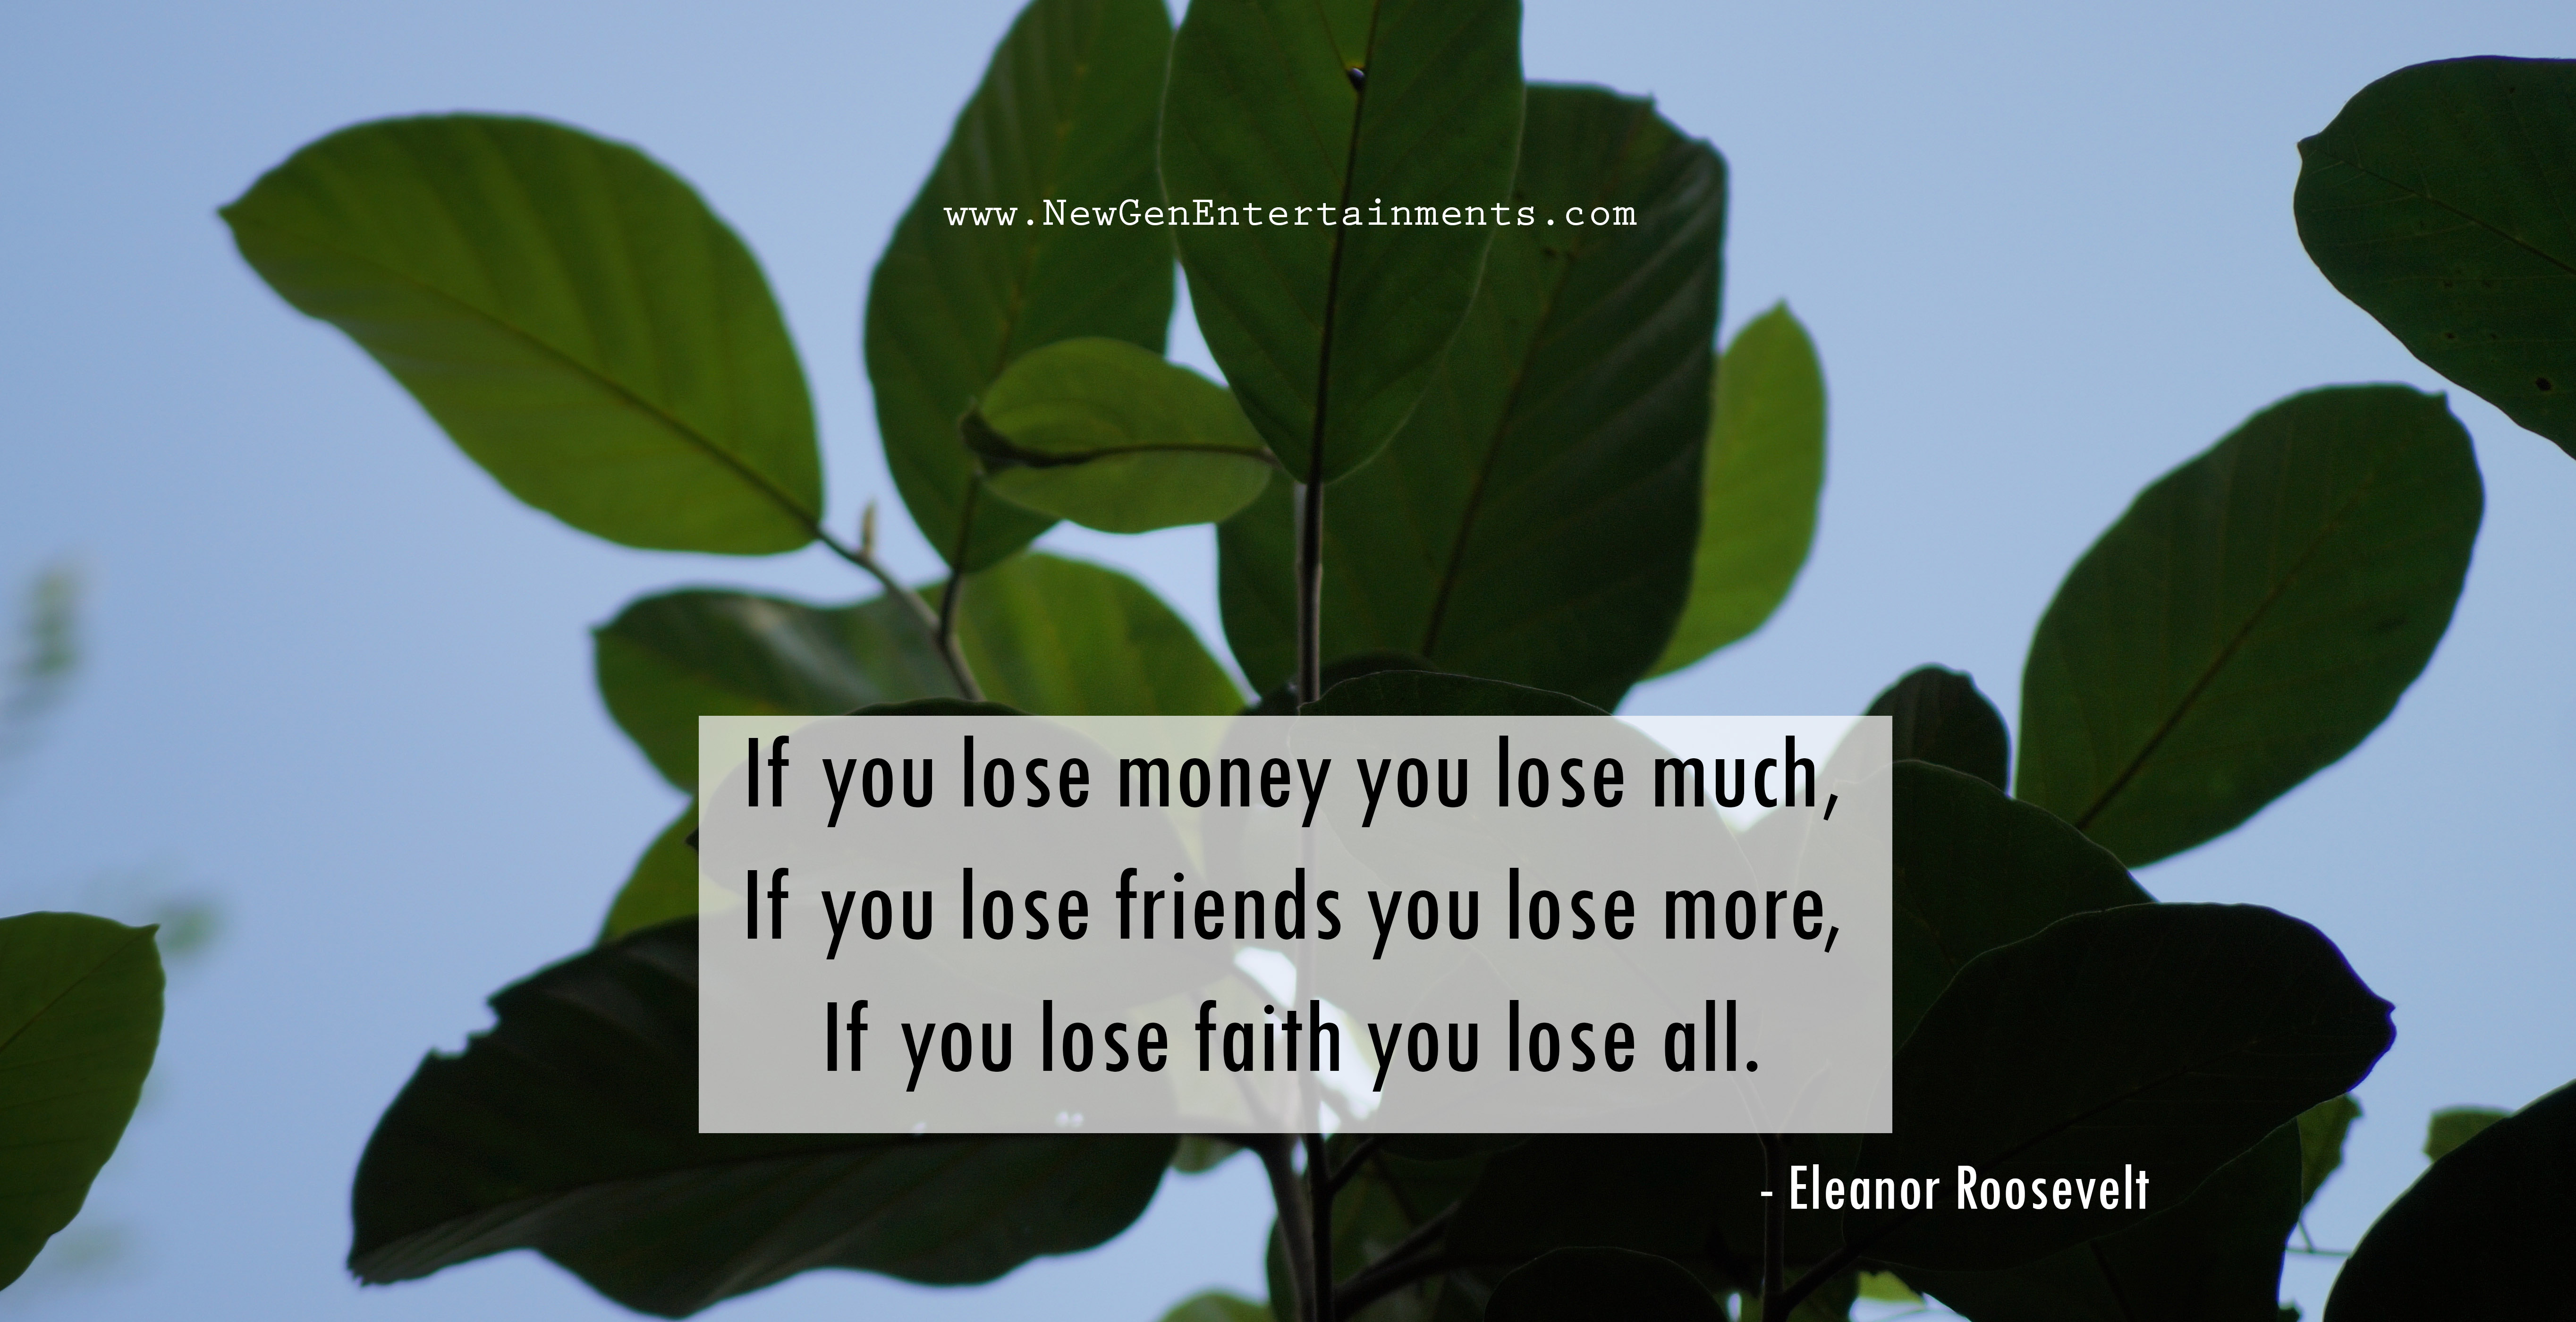 If you lose money you lose much, If you lose friends you lose more, If you lose faith you lose all